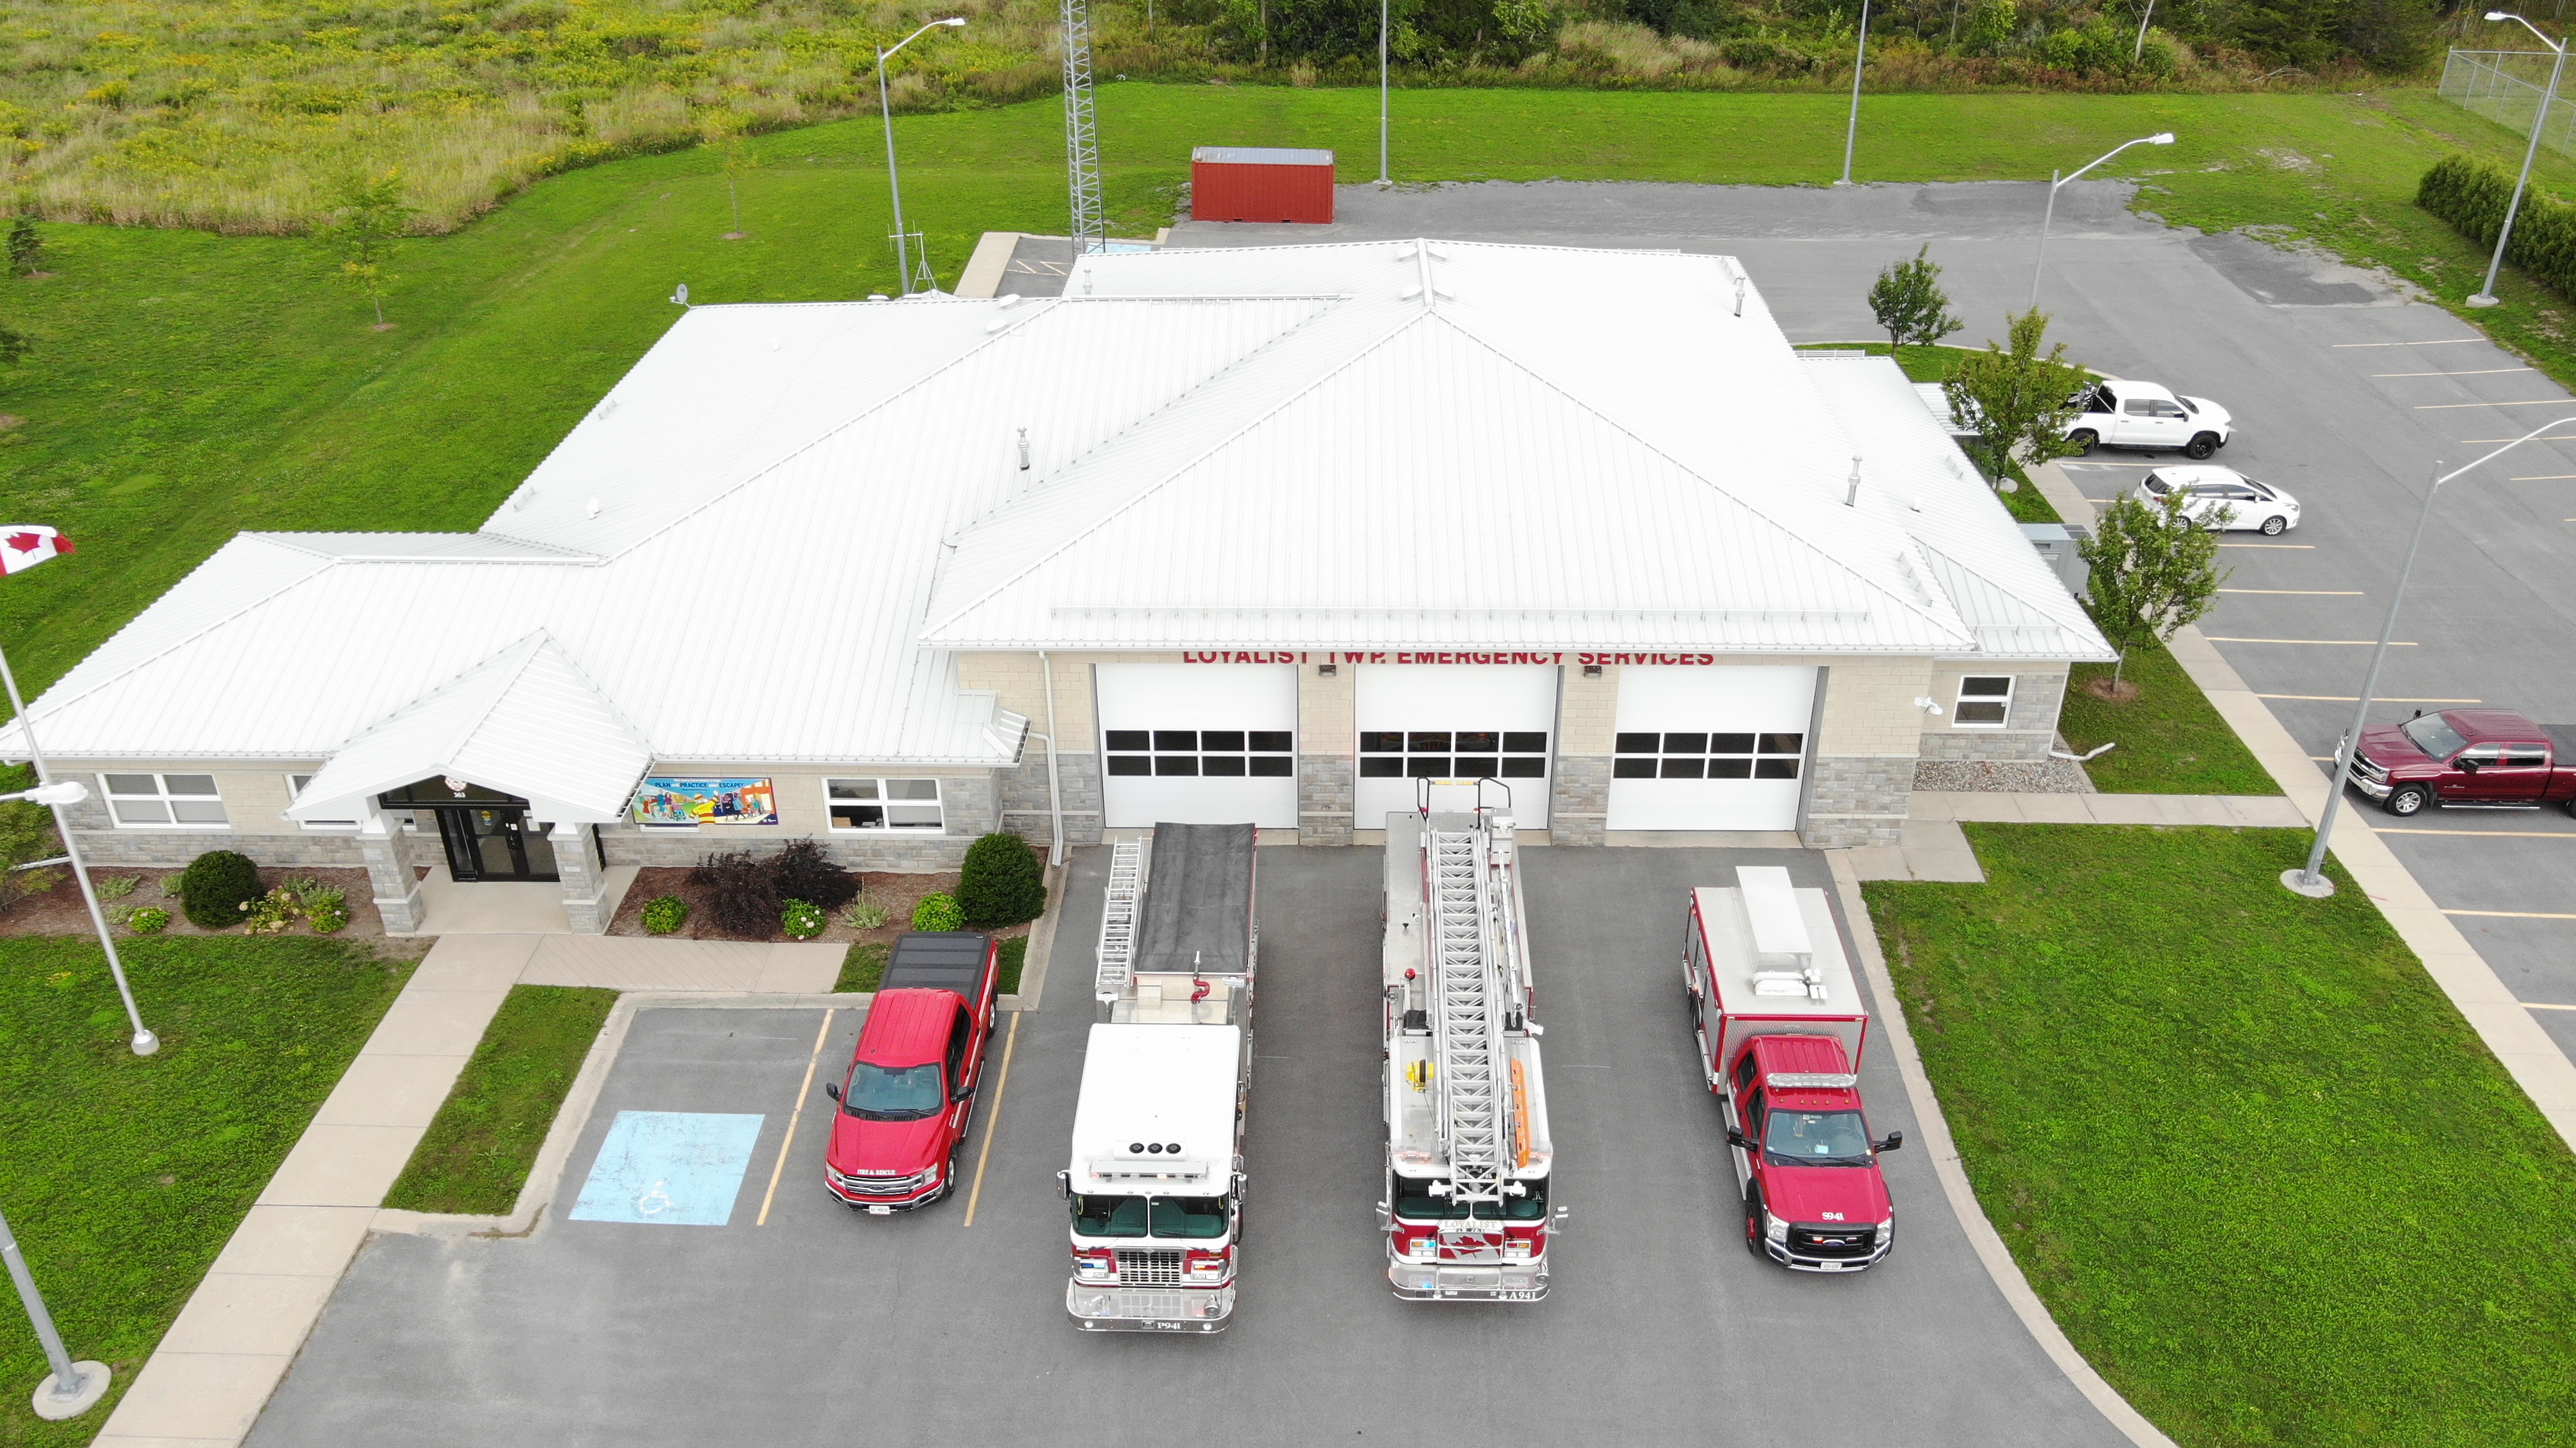 Amherstview fire station wtih trucks parked in front